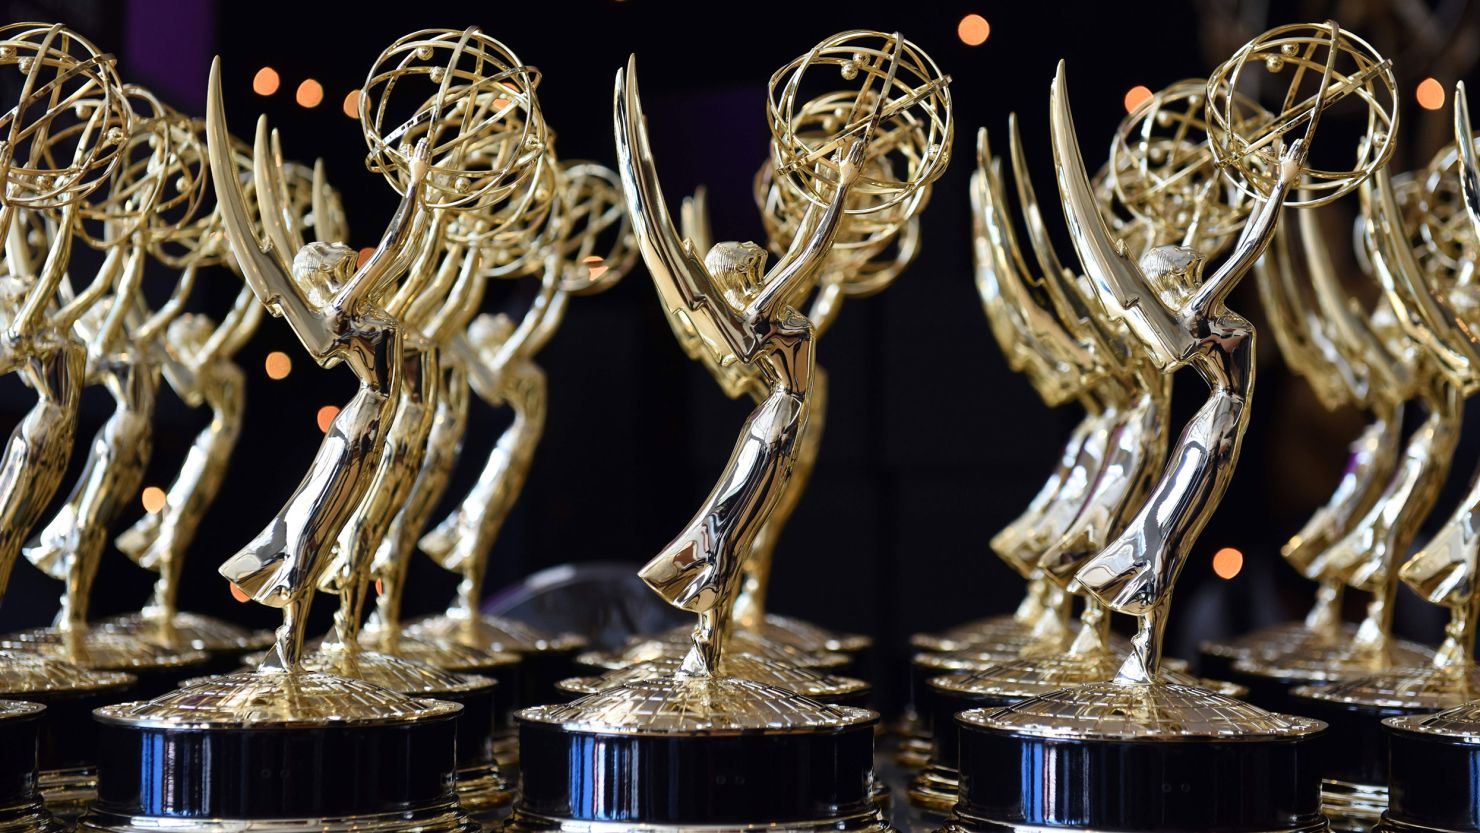 ‘Succession’ and ‘The Last of Us’ lead Emmy nominations | CNN